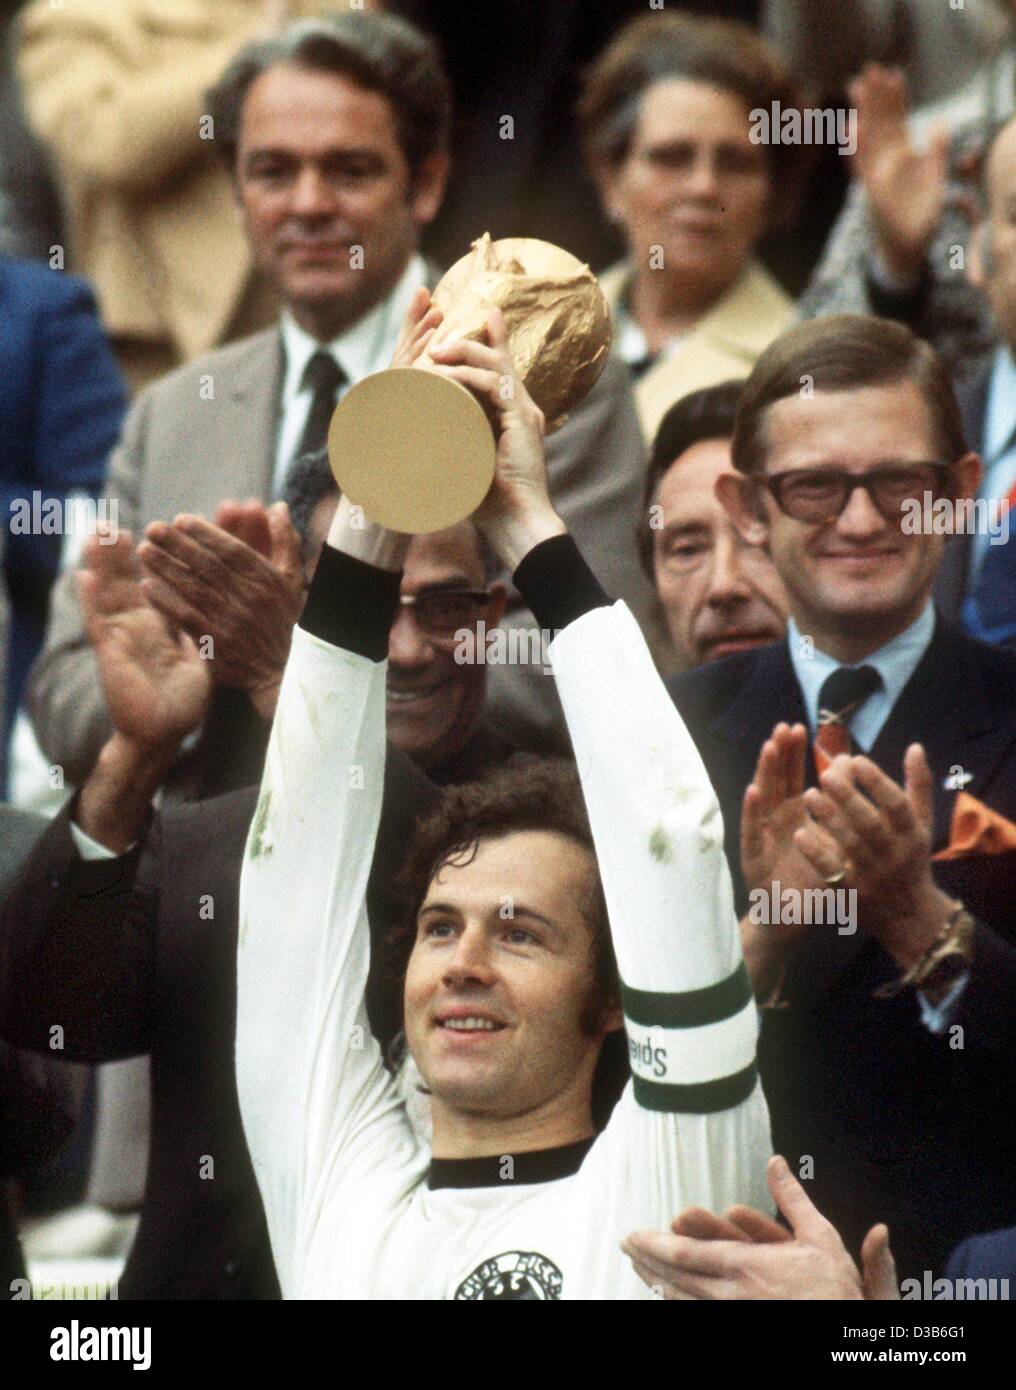 (dpa files) - Franz Beckenbauer, then German team captain, happily lifts the 'Coupe Jules Rimet' after winning the Soccer World Cup in Munich, 7 July 1974. Right behind Beckenbauer applaudes Pieter van Vollenhofen. Germany defeated the Netherlands 2:1 in the final. Stock Photo